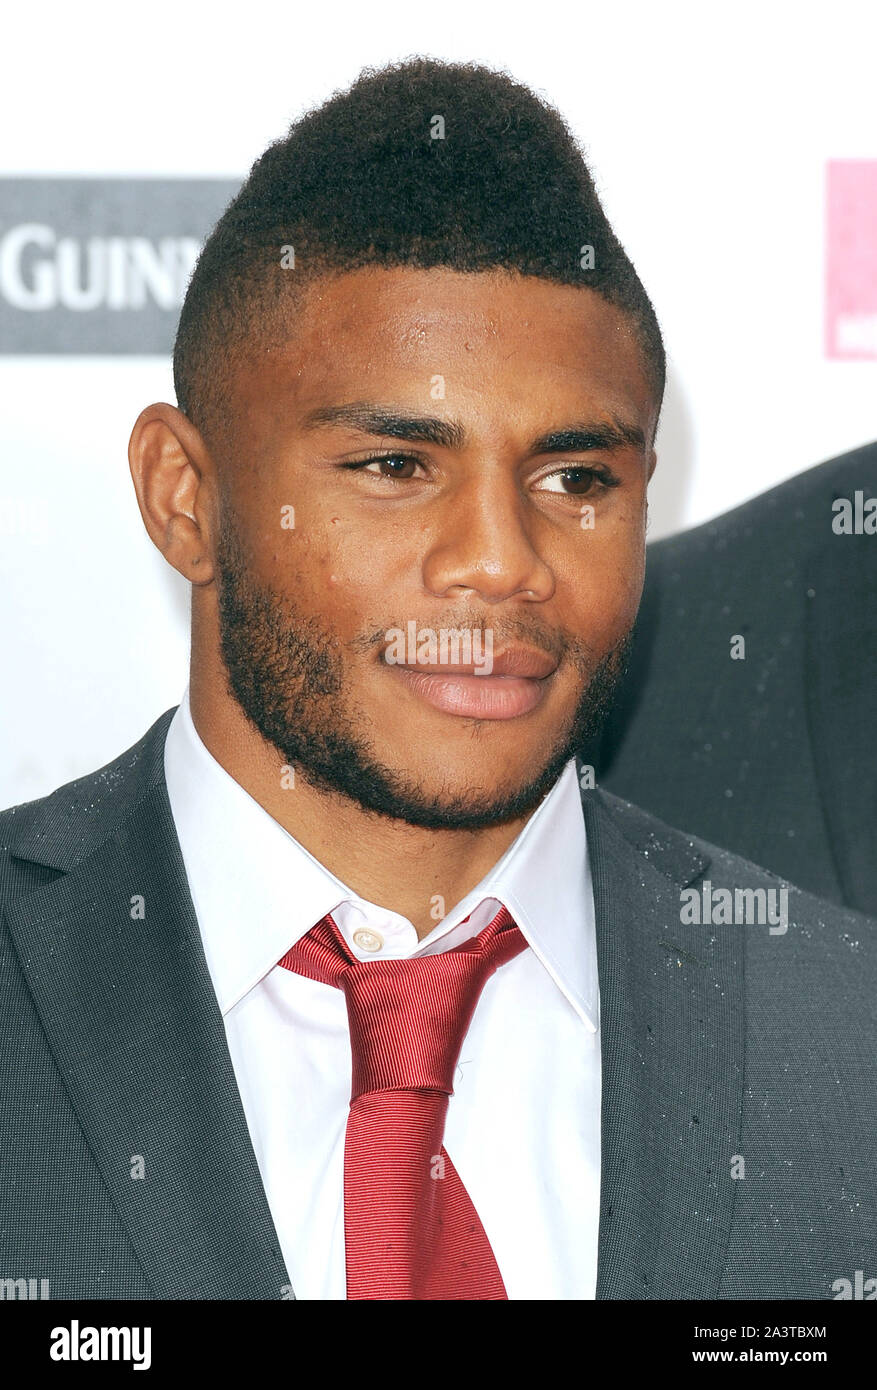 Photo Must Be Credited ©Jeff Spicer/Alpha Press 079852 05/08/2015 Kyle Eastmond at the Carry Them Home Rugby Dinner held at Grosvenor House London Stock Photo